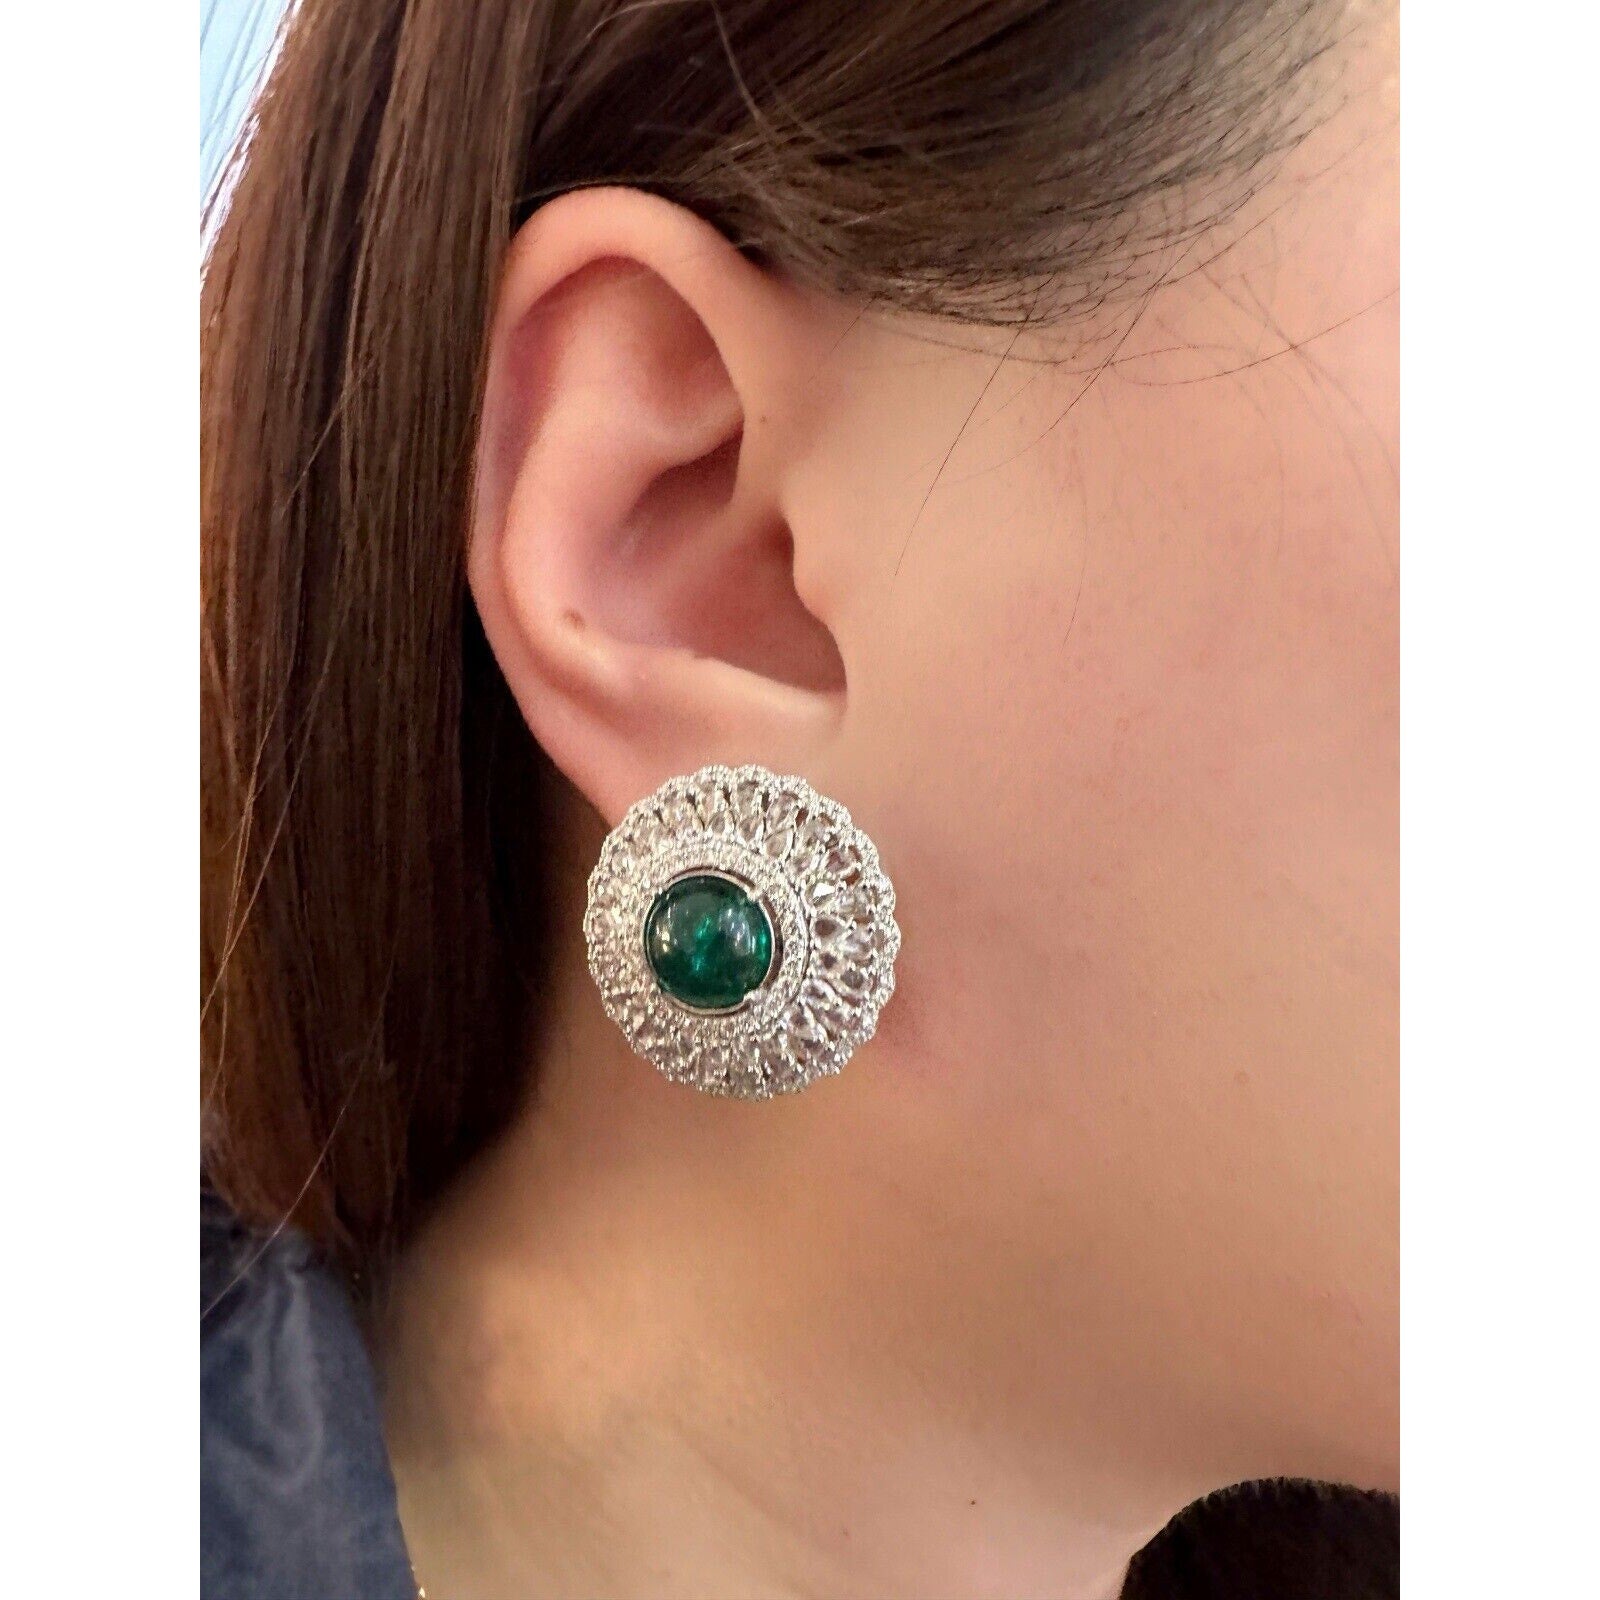 Emerald Cabochon and Rose cut Diamond Earrings in 18k White Gold - HM2569EI